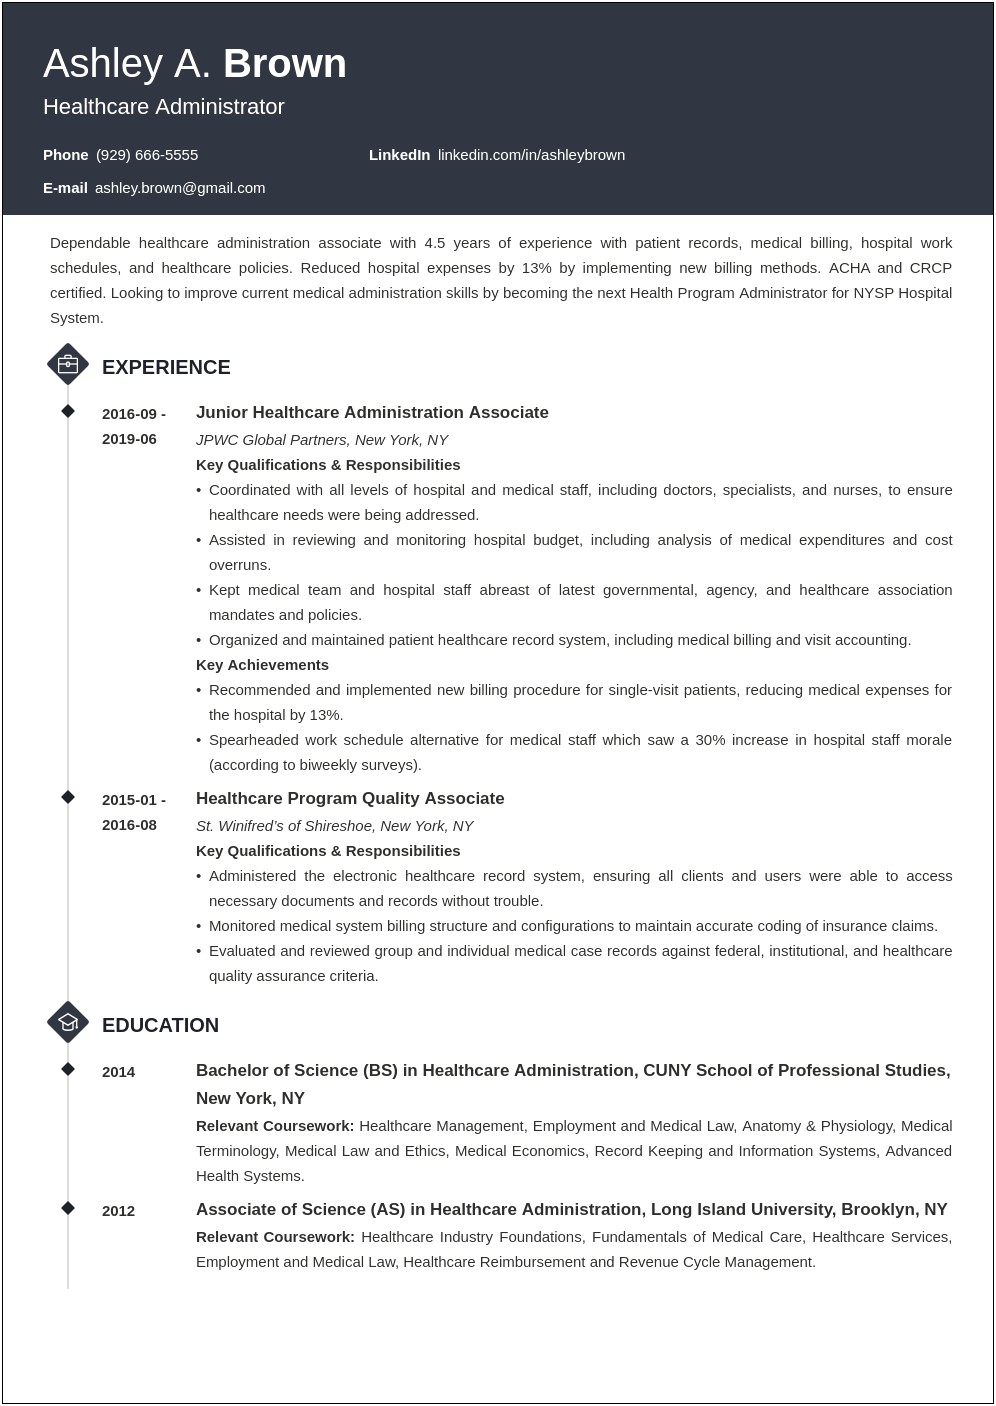 Resume Summary Examples For Medical Field